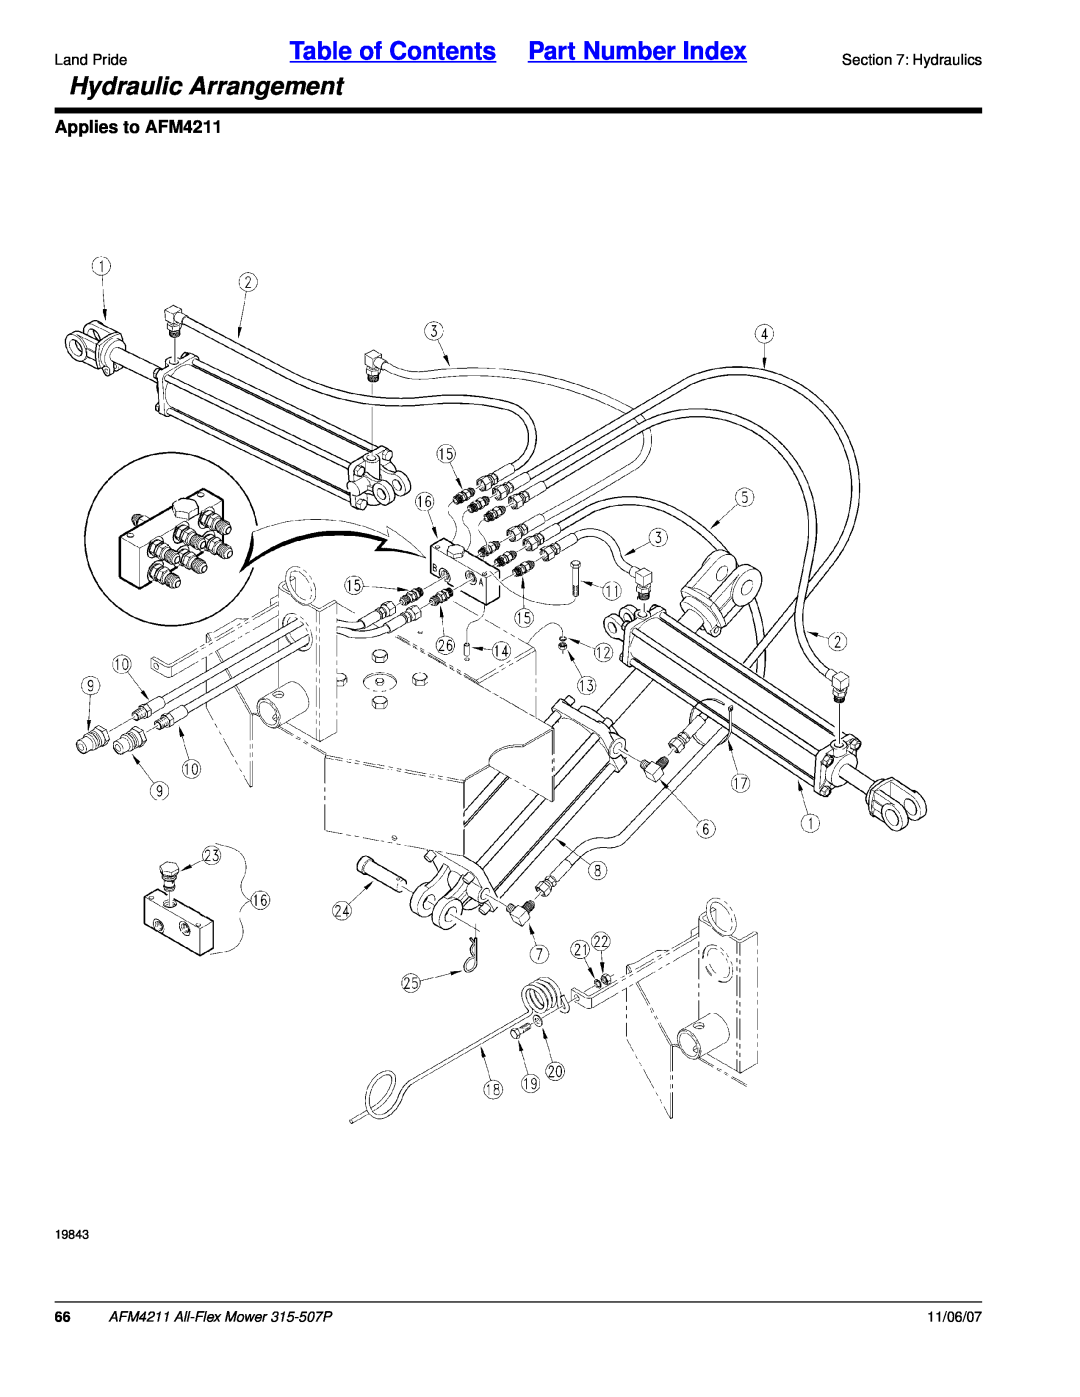 Land Pride All-Flex Mower manual Hydraulic Arrangement, Table of Contents Part Number Index, Applies to AFM4211, 11/06/07 